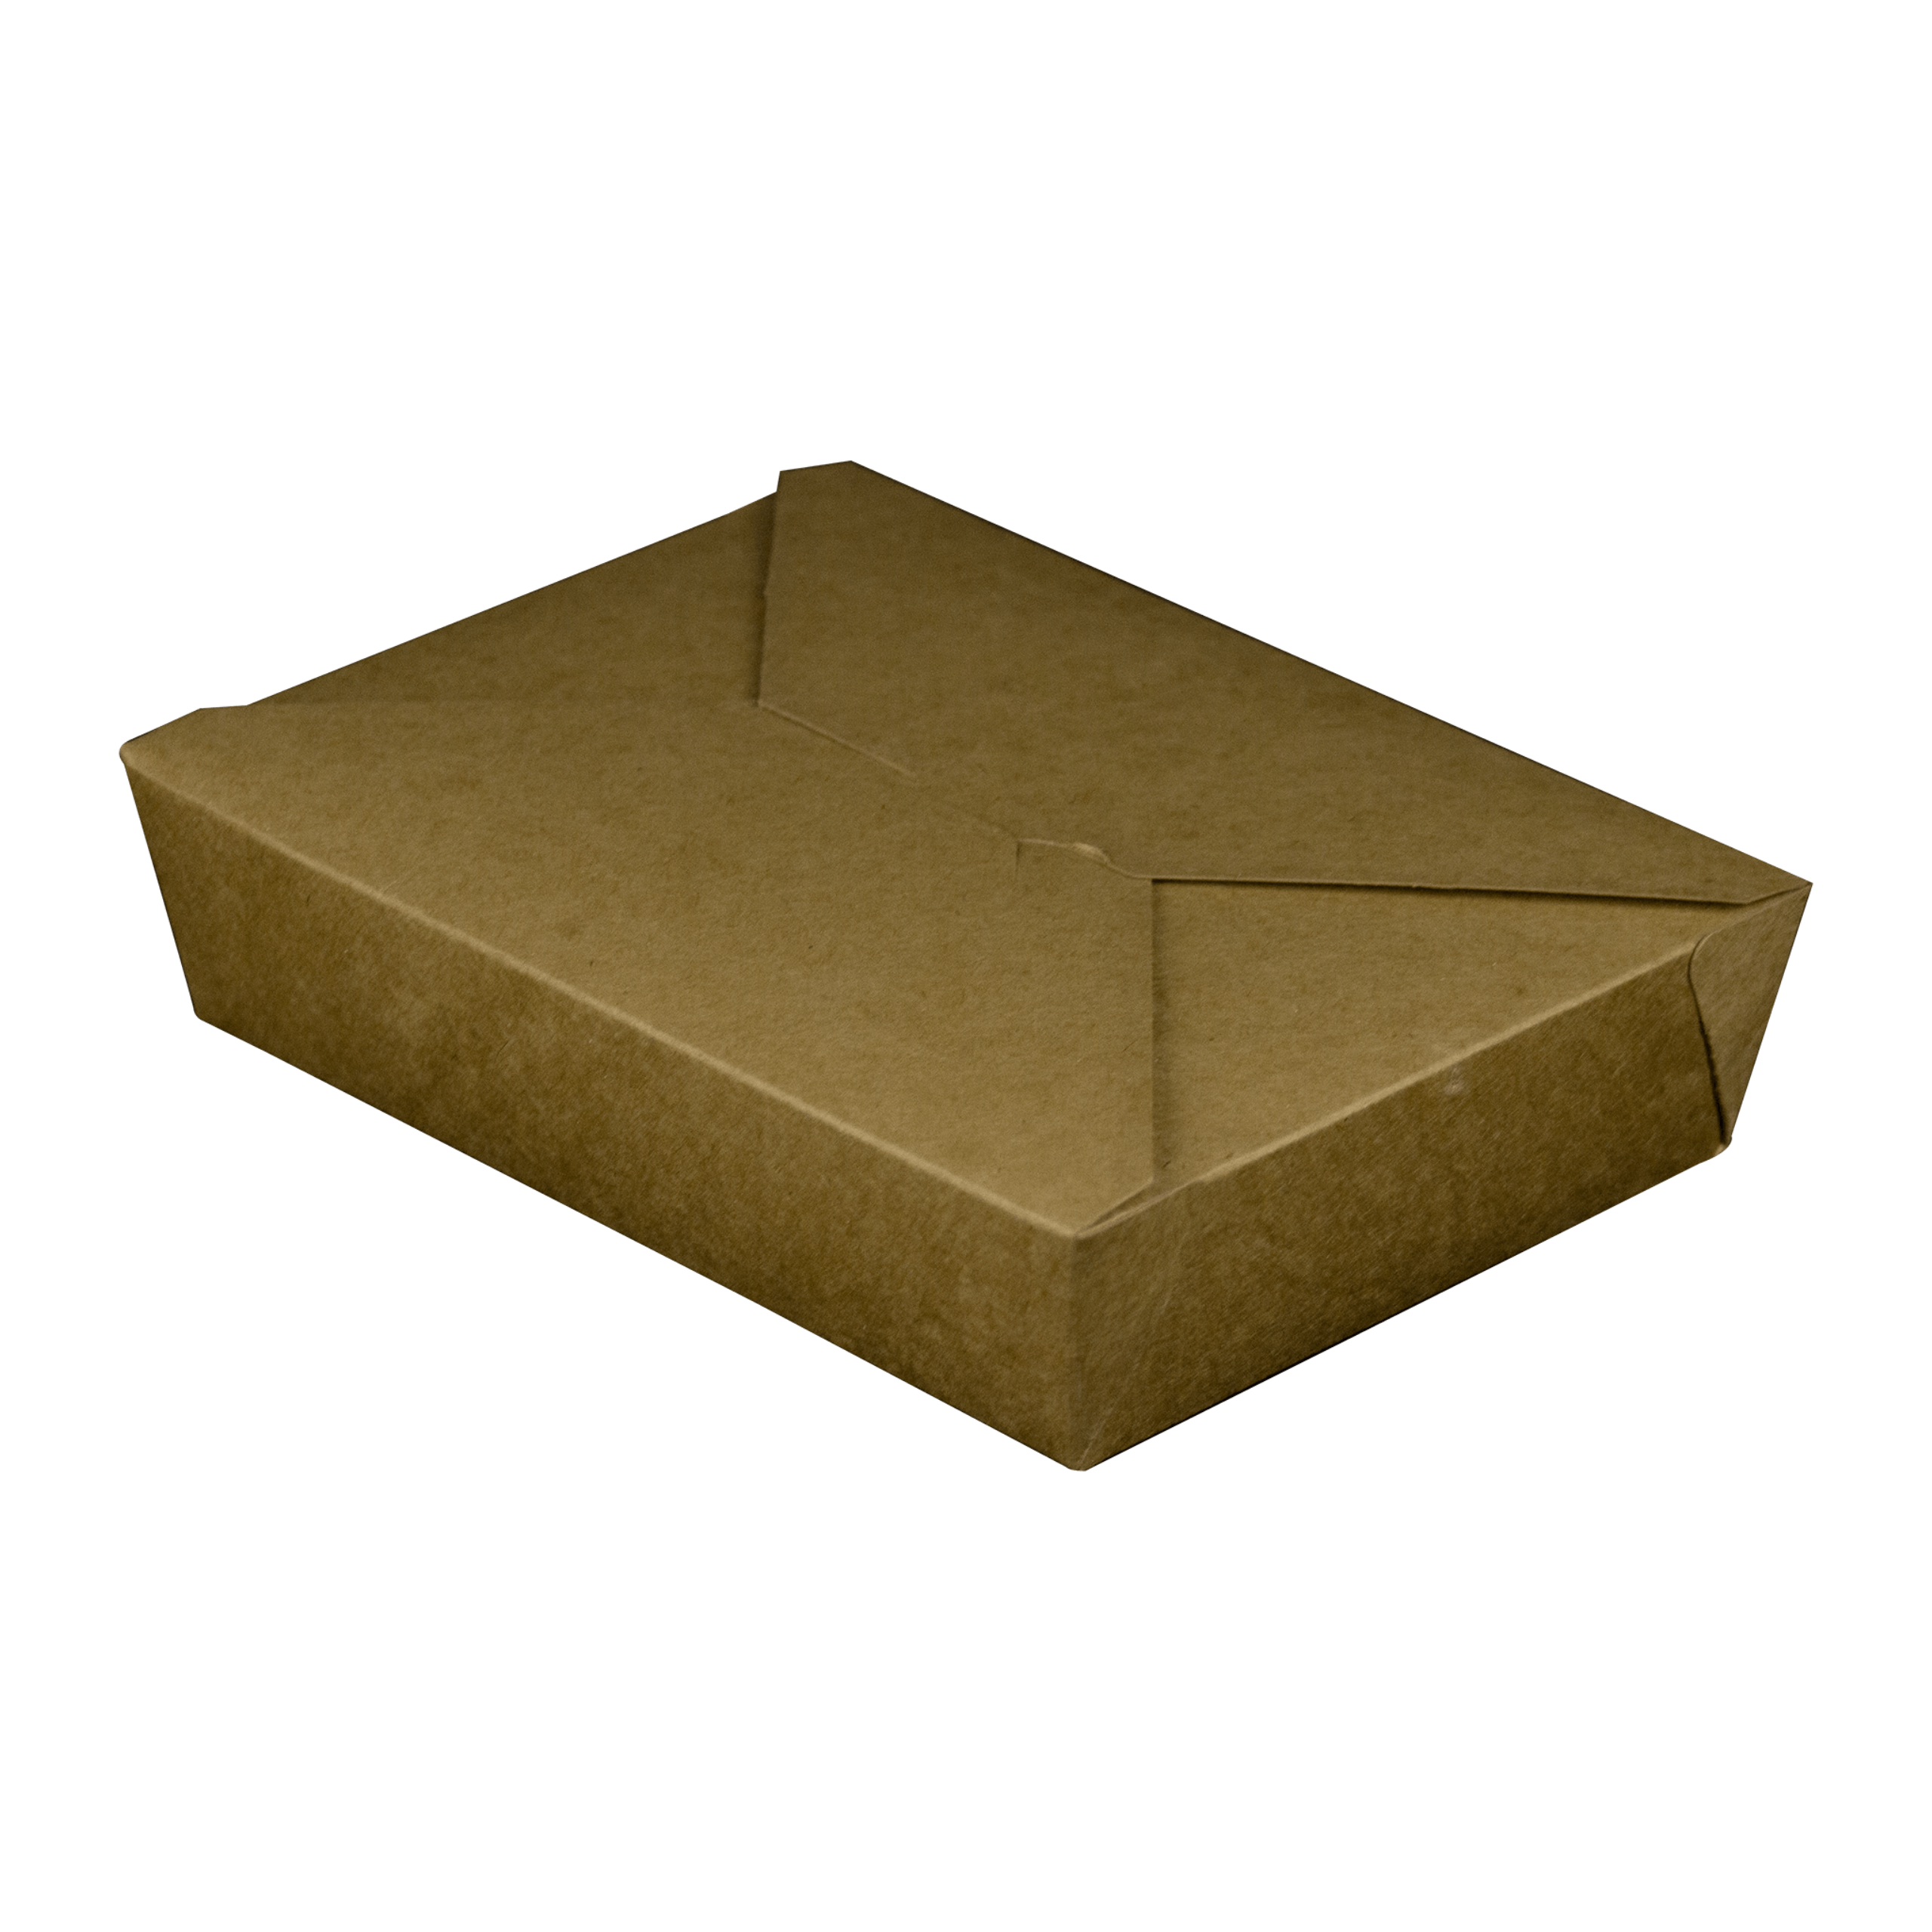 Bionature 19056 - #2 Take Out Box - Case of 200